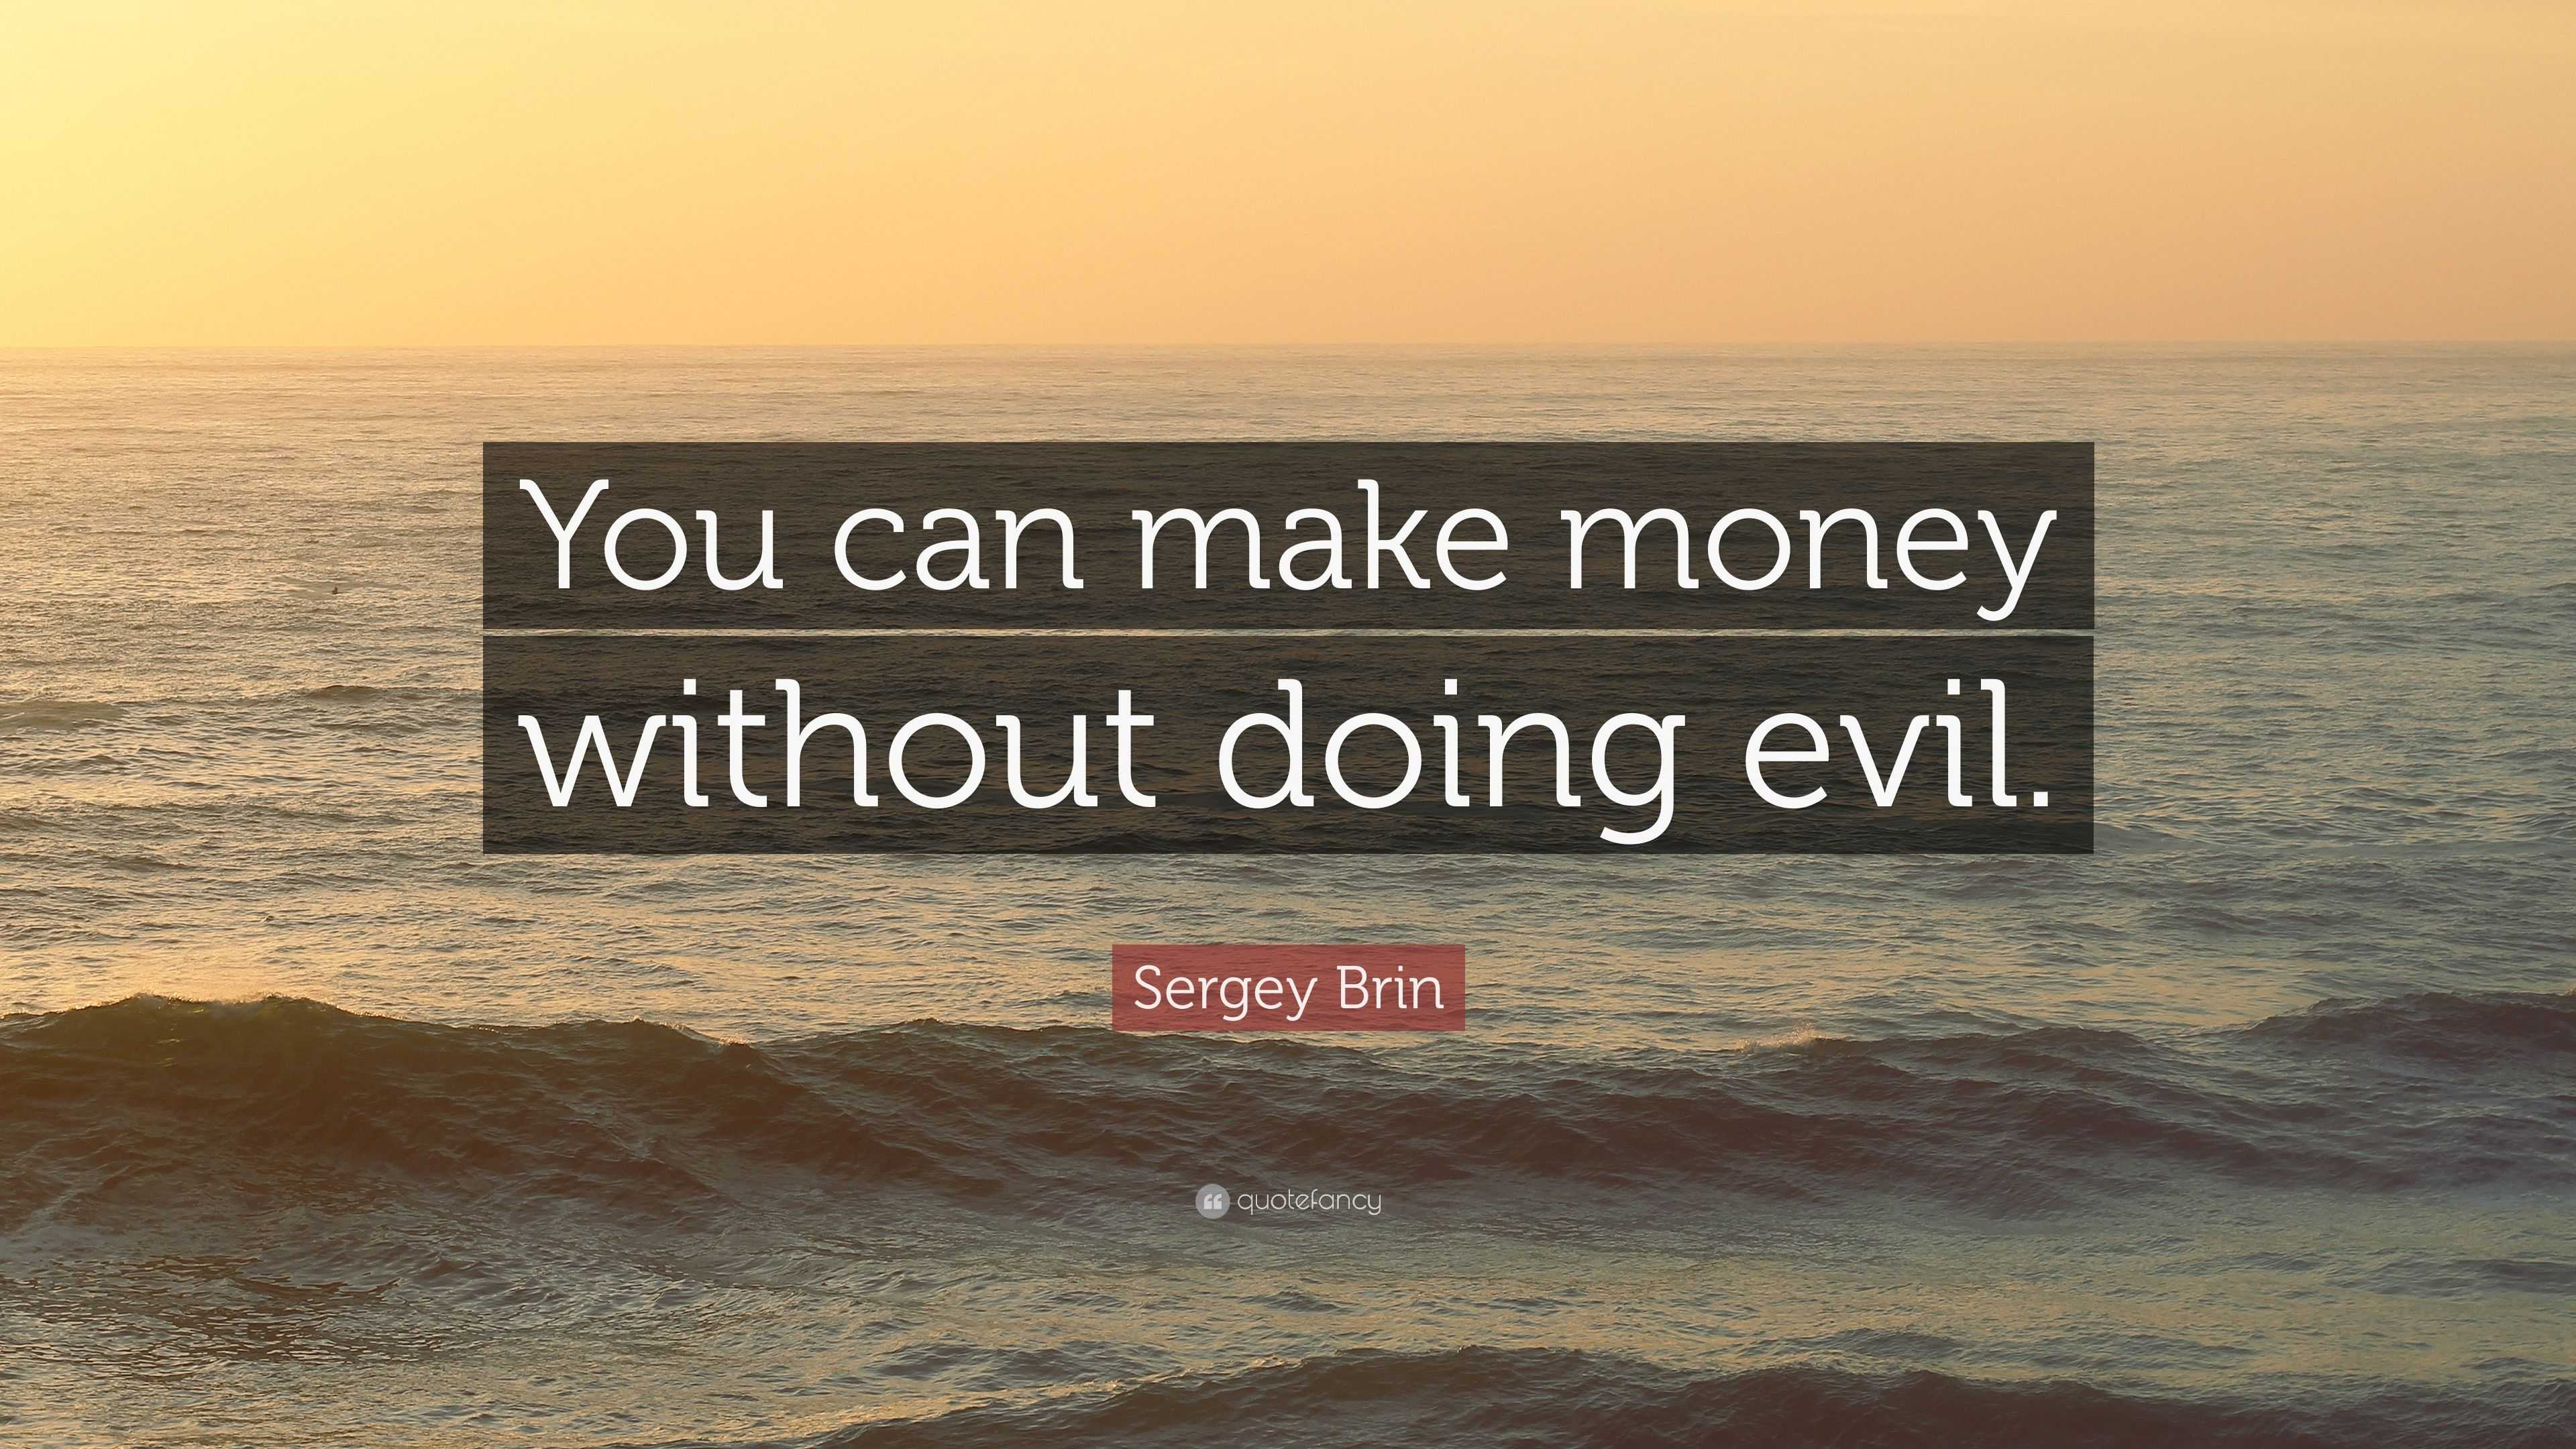 you can make money without evil